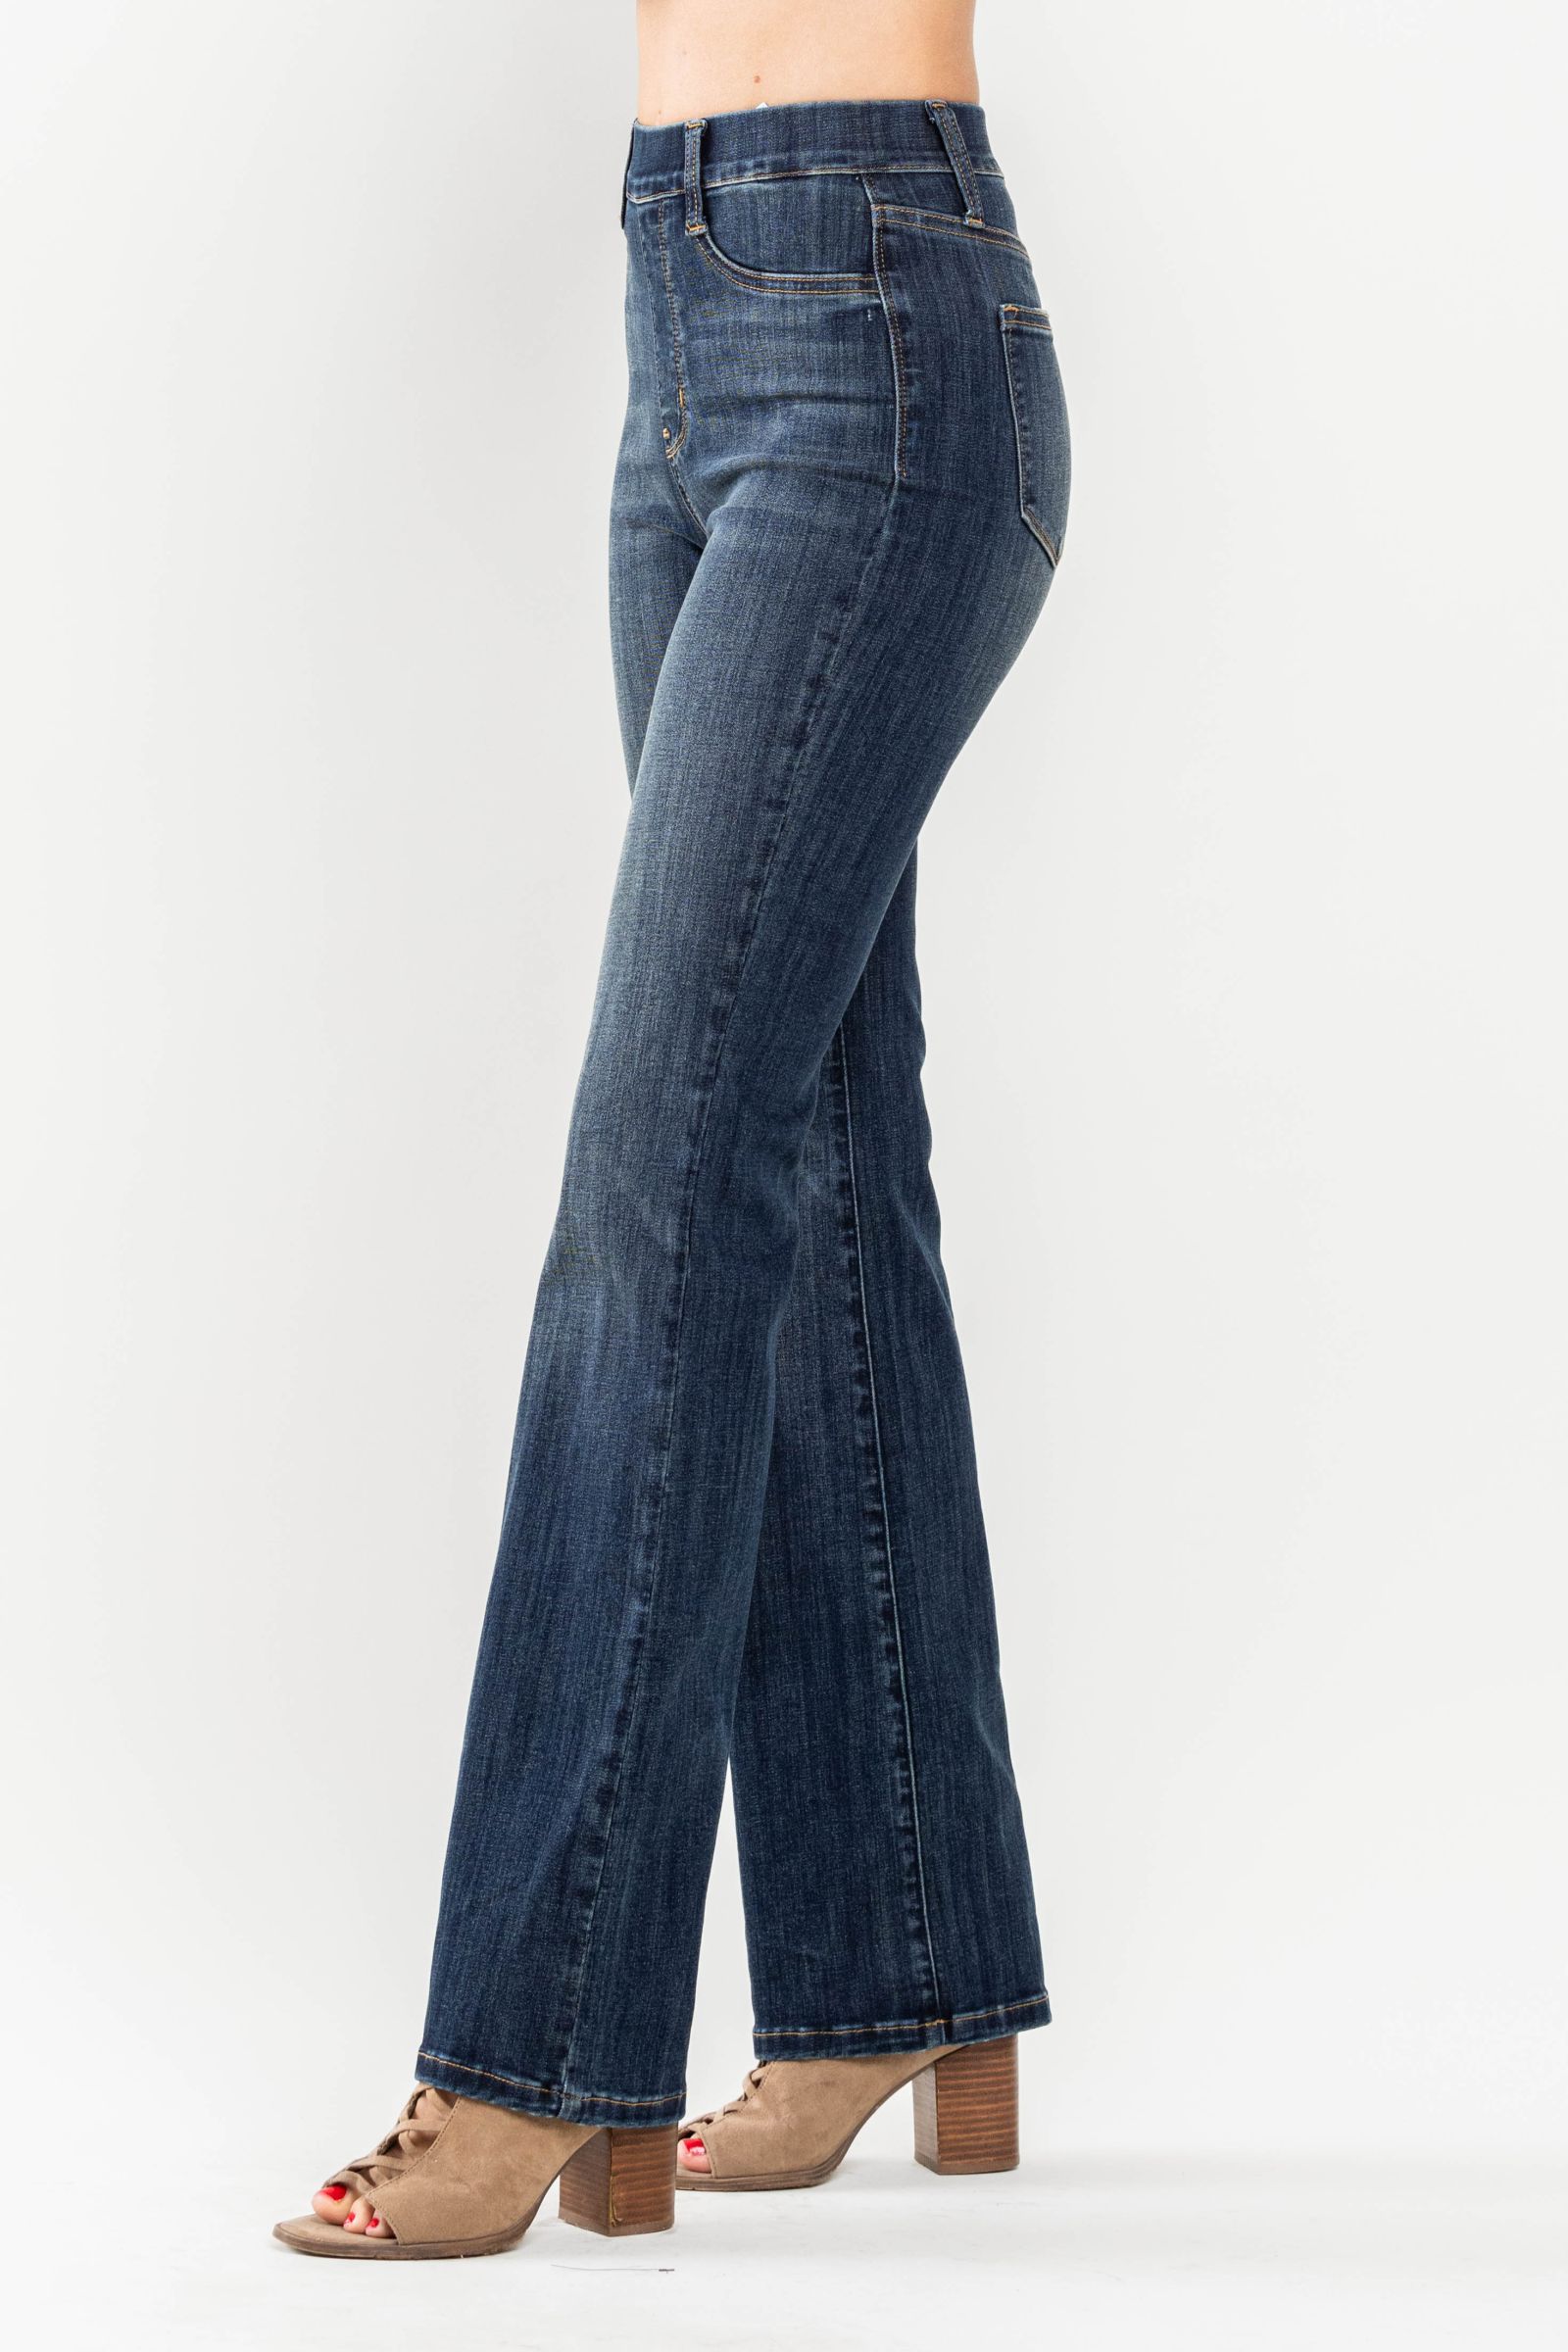 High Waist Vintage Pull On Slim Boot Cut Jean by Judy Blue